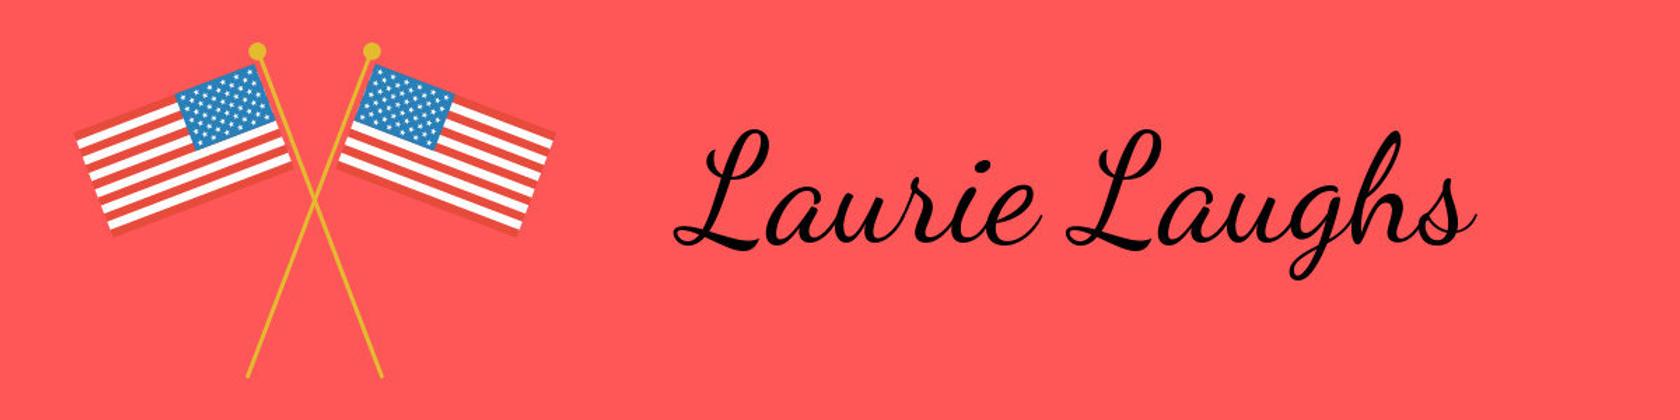 Laurie Laughs